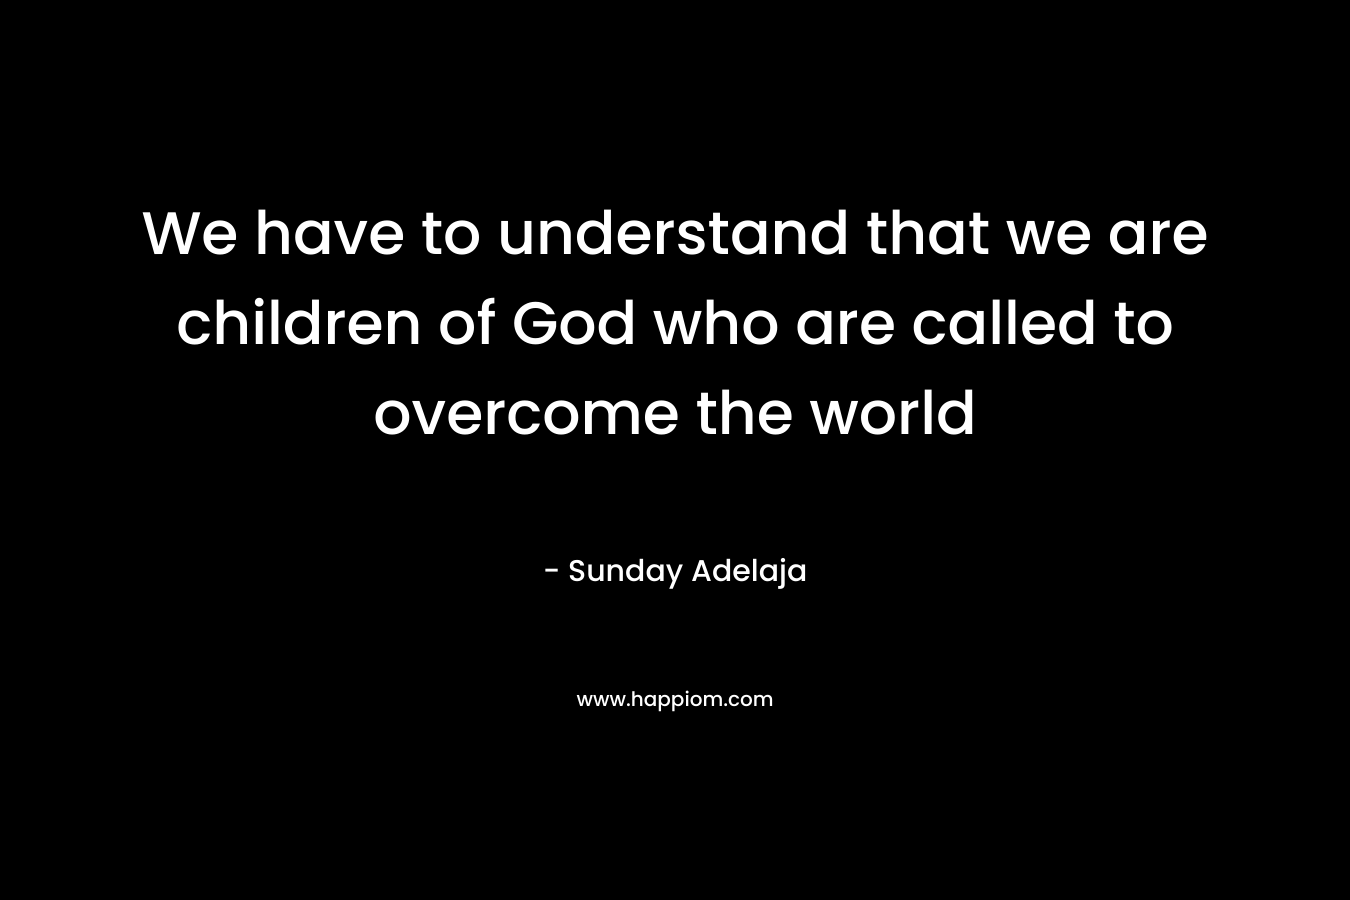 We have to understand that we are children of God who are called to overcome the world